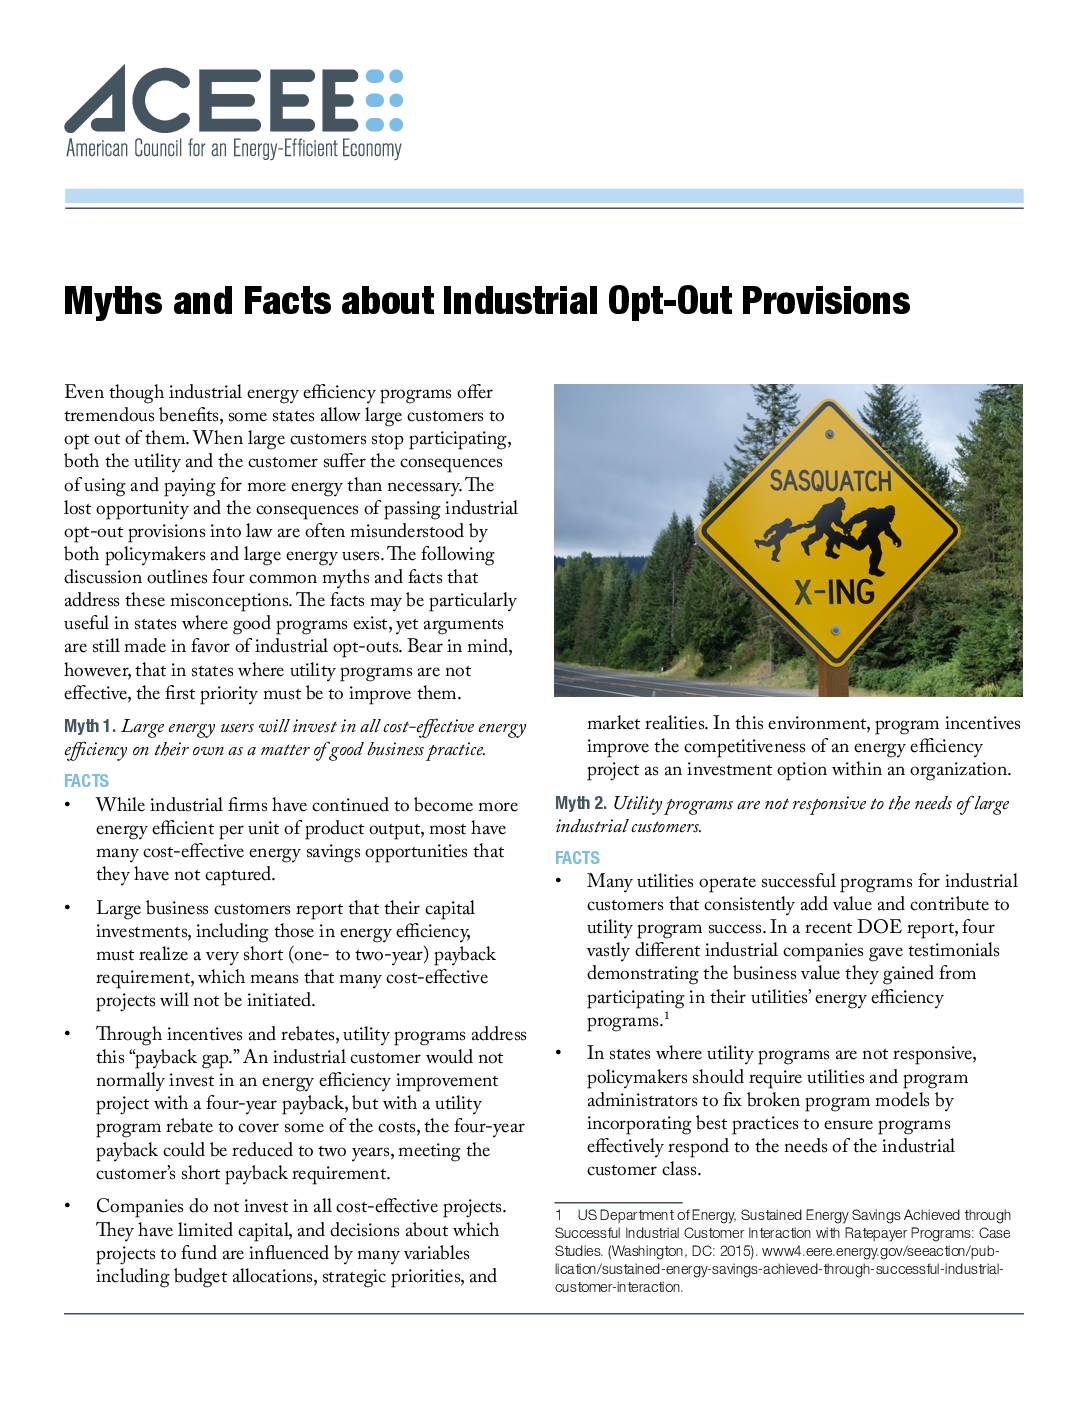 Myths and Facts about Industrial Opt-Out Provisions